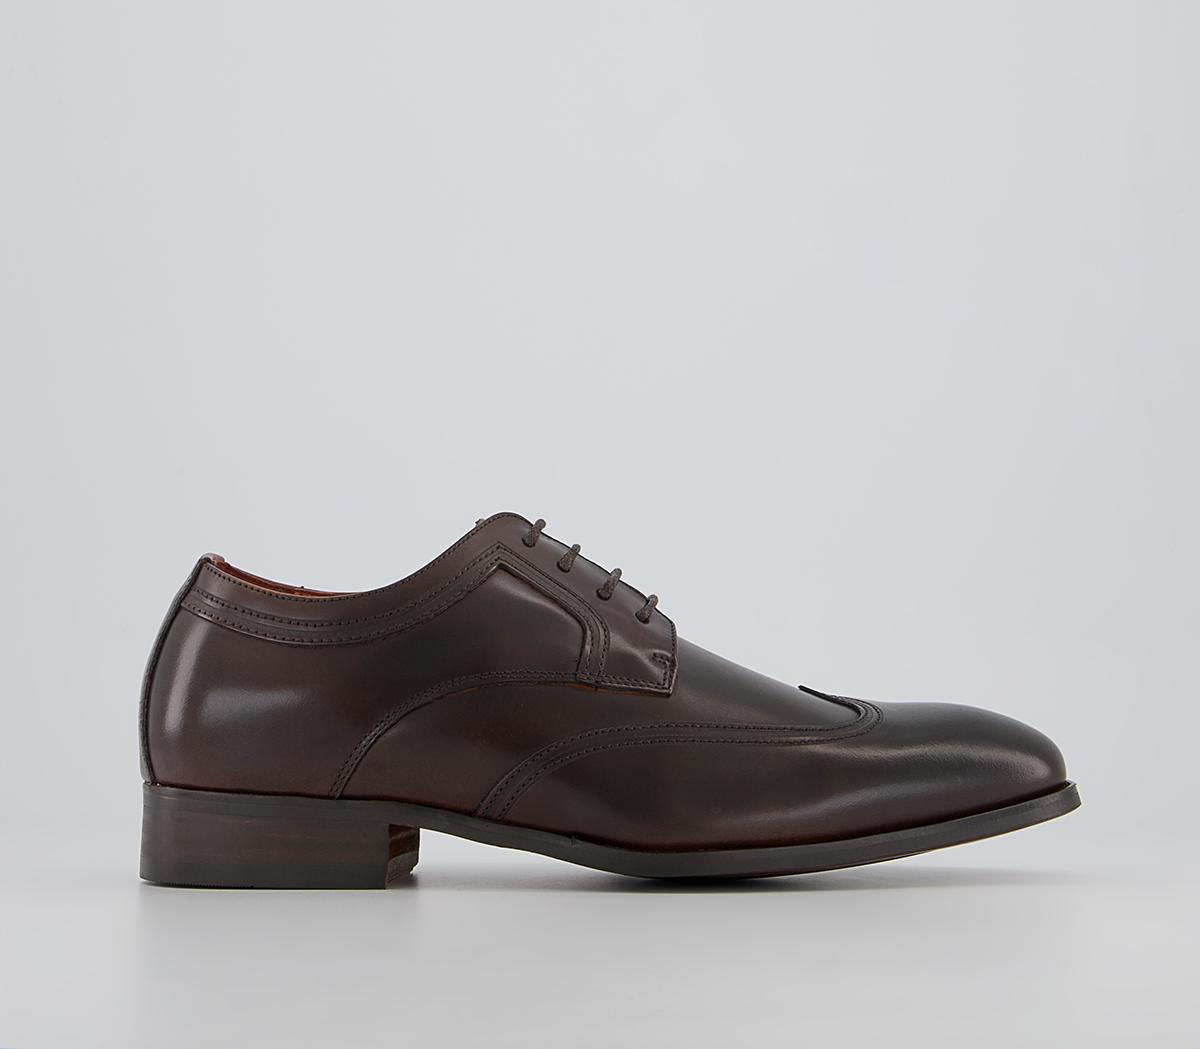 OFFICEMatayo High Shine Plain Toe Wingcap Derby ShoesBrown Leather